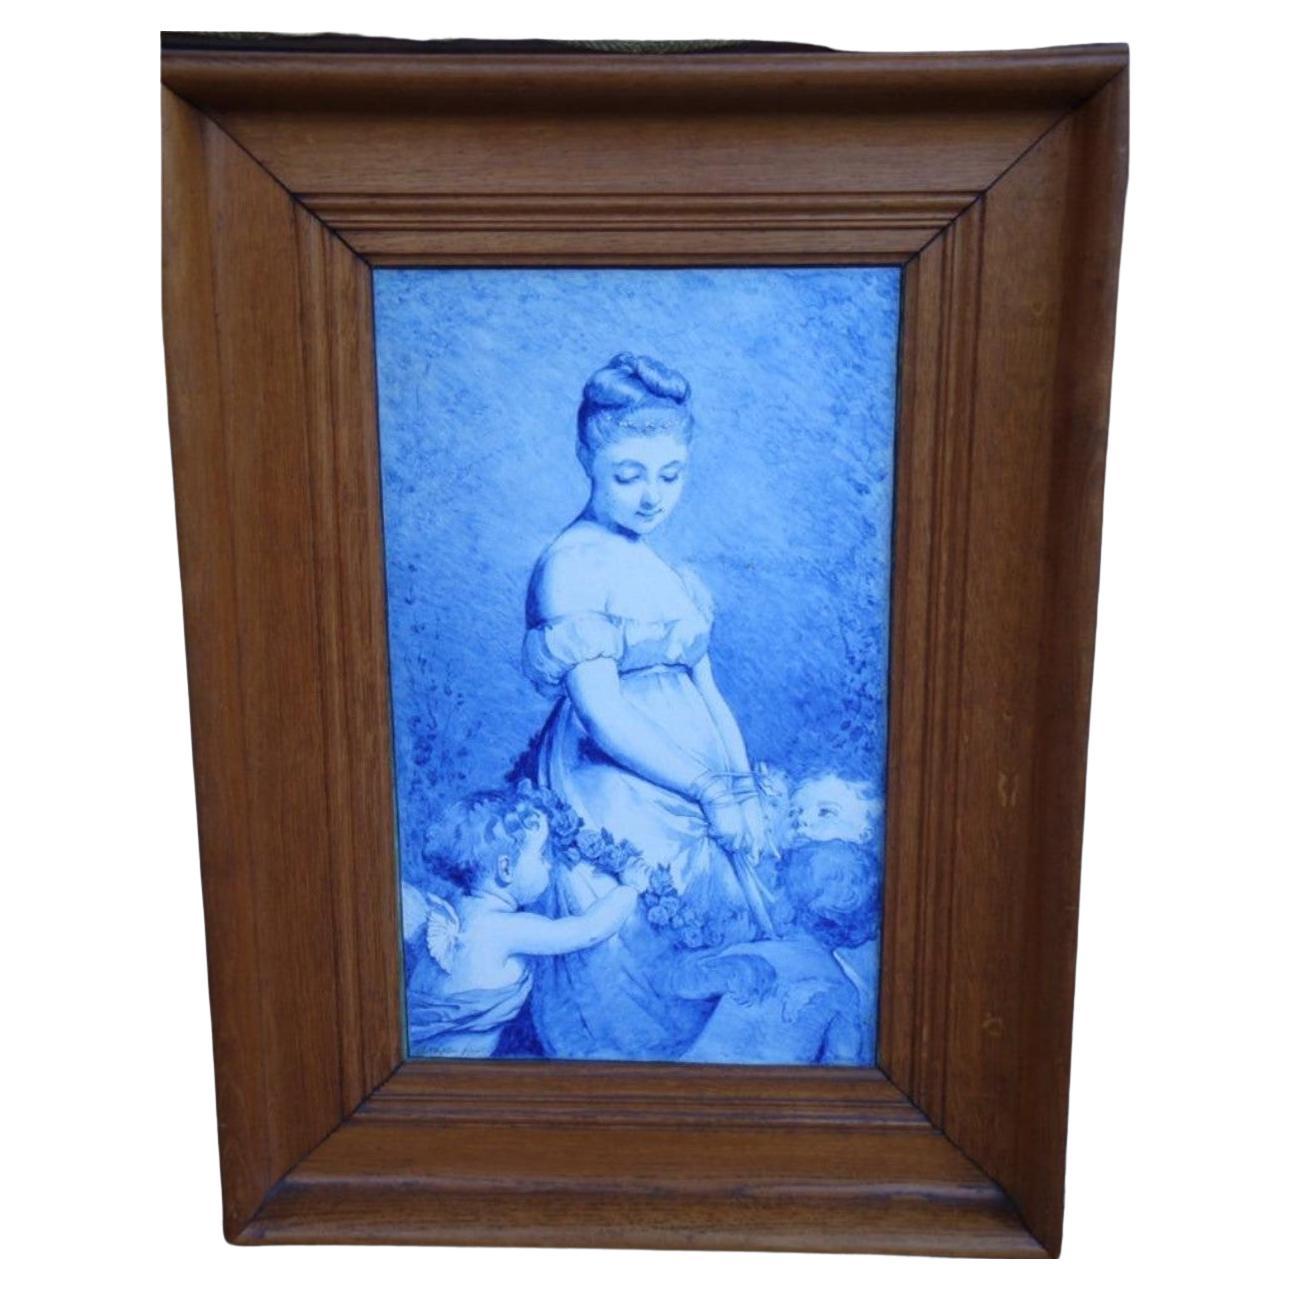  Beautiful Framed 19TH C Painting on Porcelain Woman Children Charles Chaplin For Sale